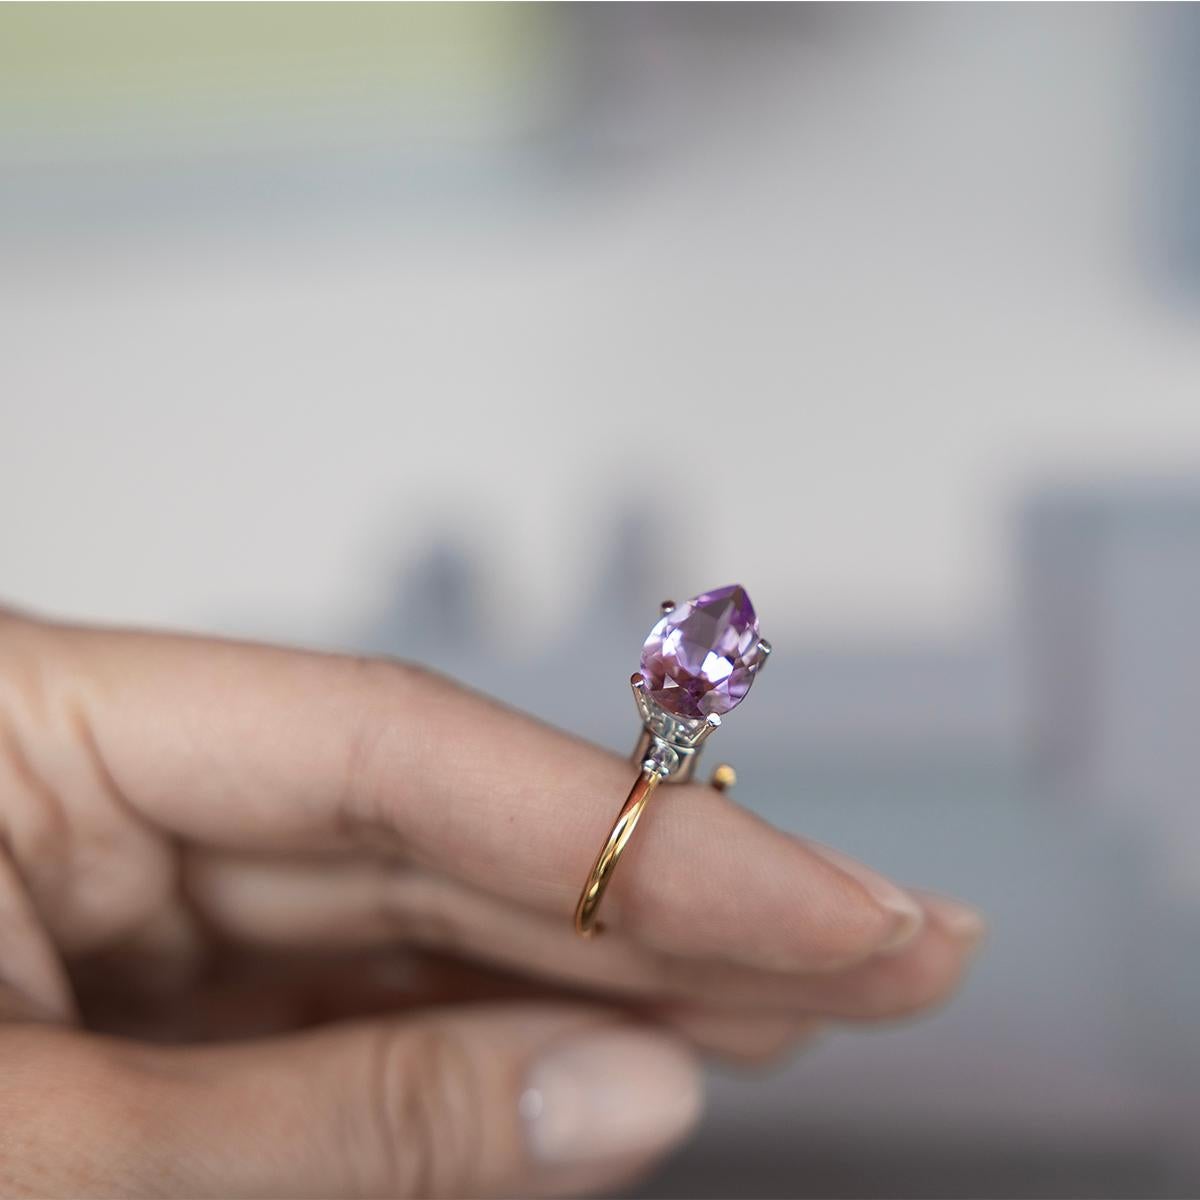 Contemporary Pink Amethyst, Pear Cut  '4.5 Carat' in a Golden Yellow Ring, 18k  For Sale